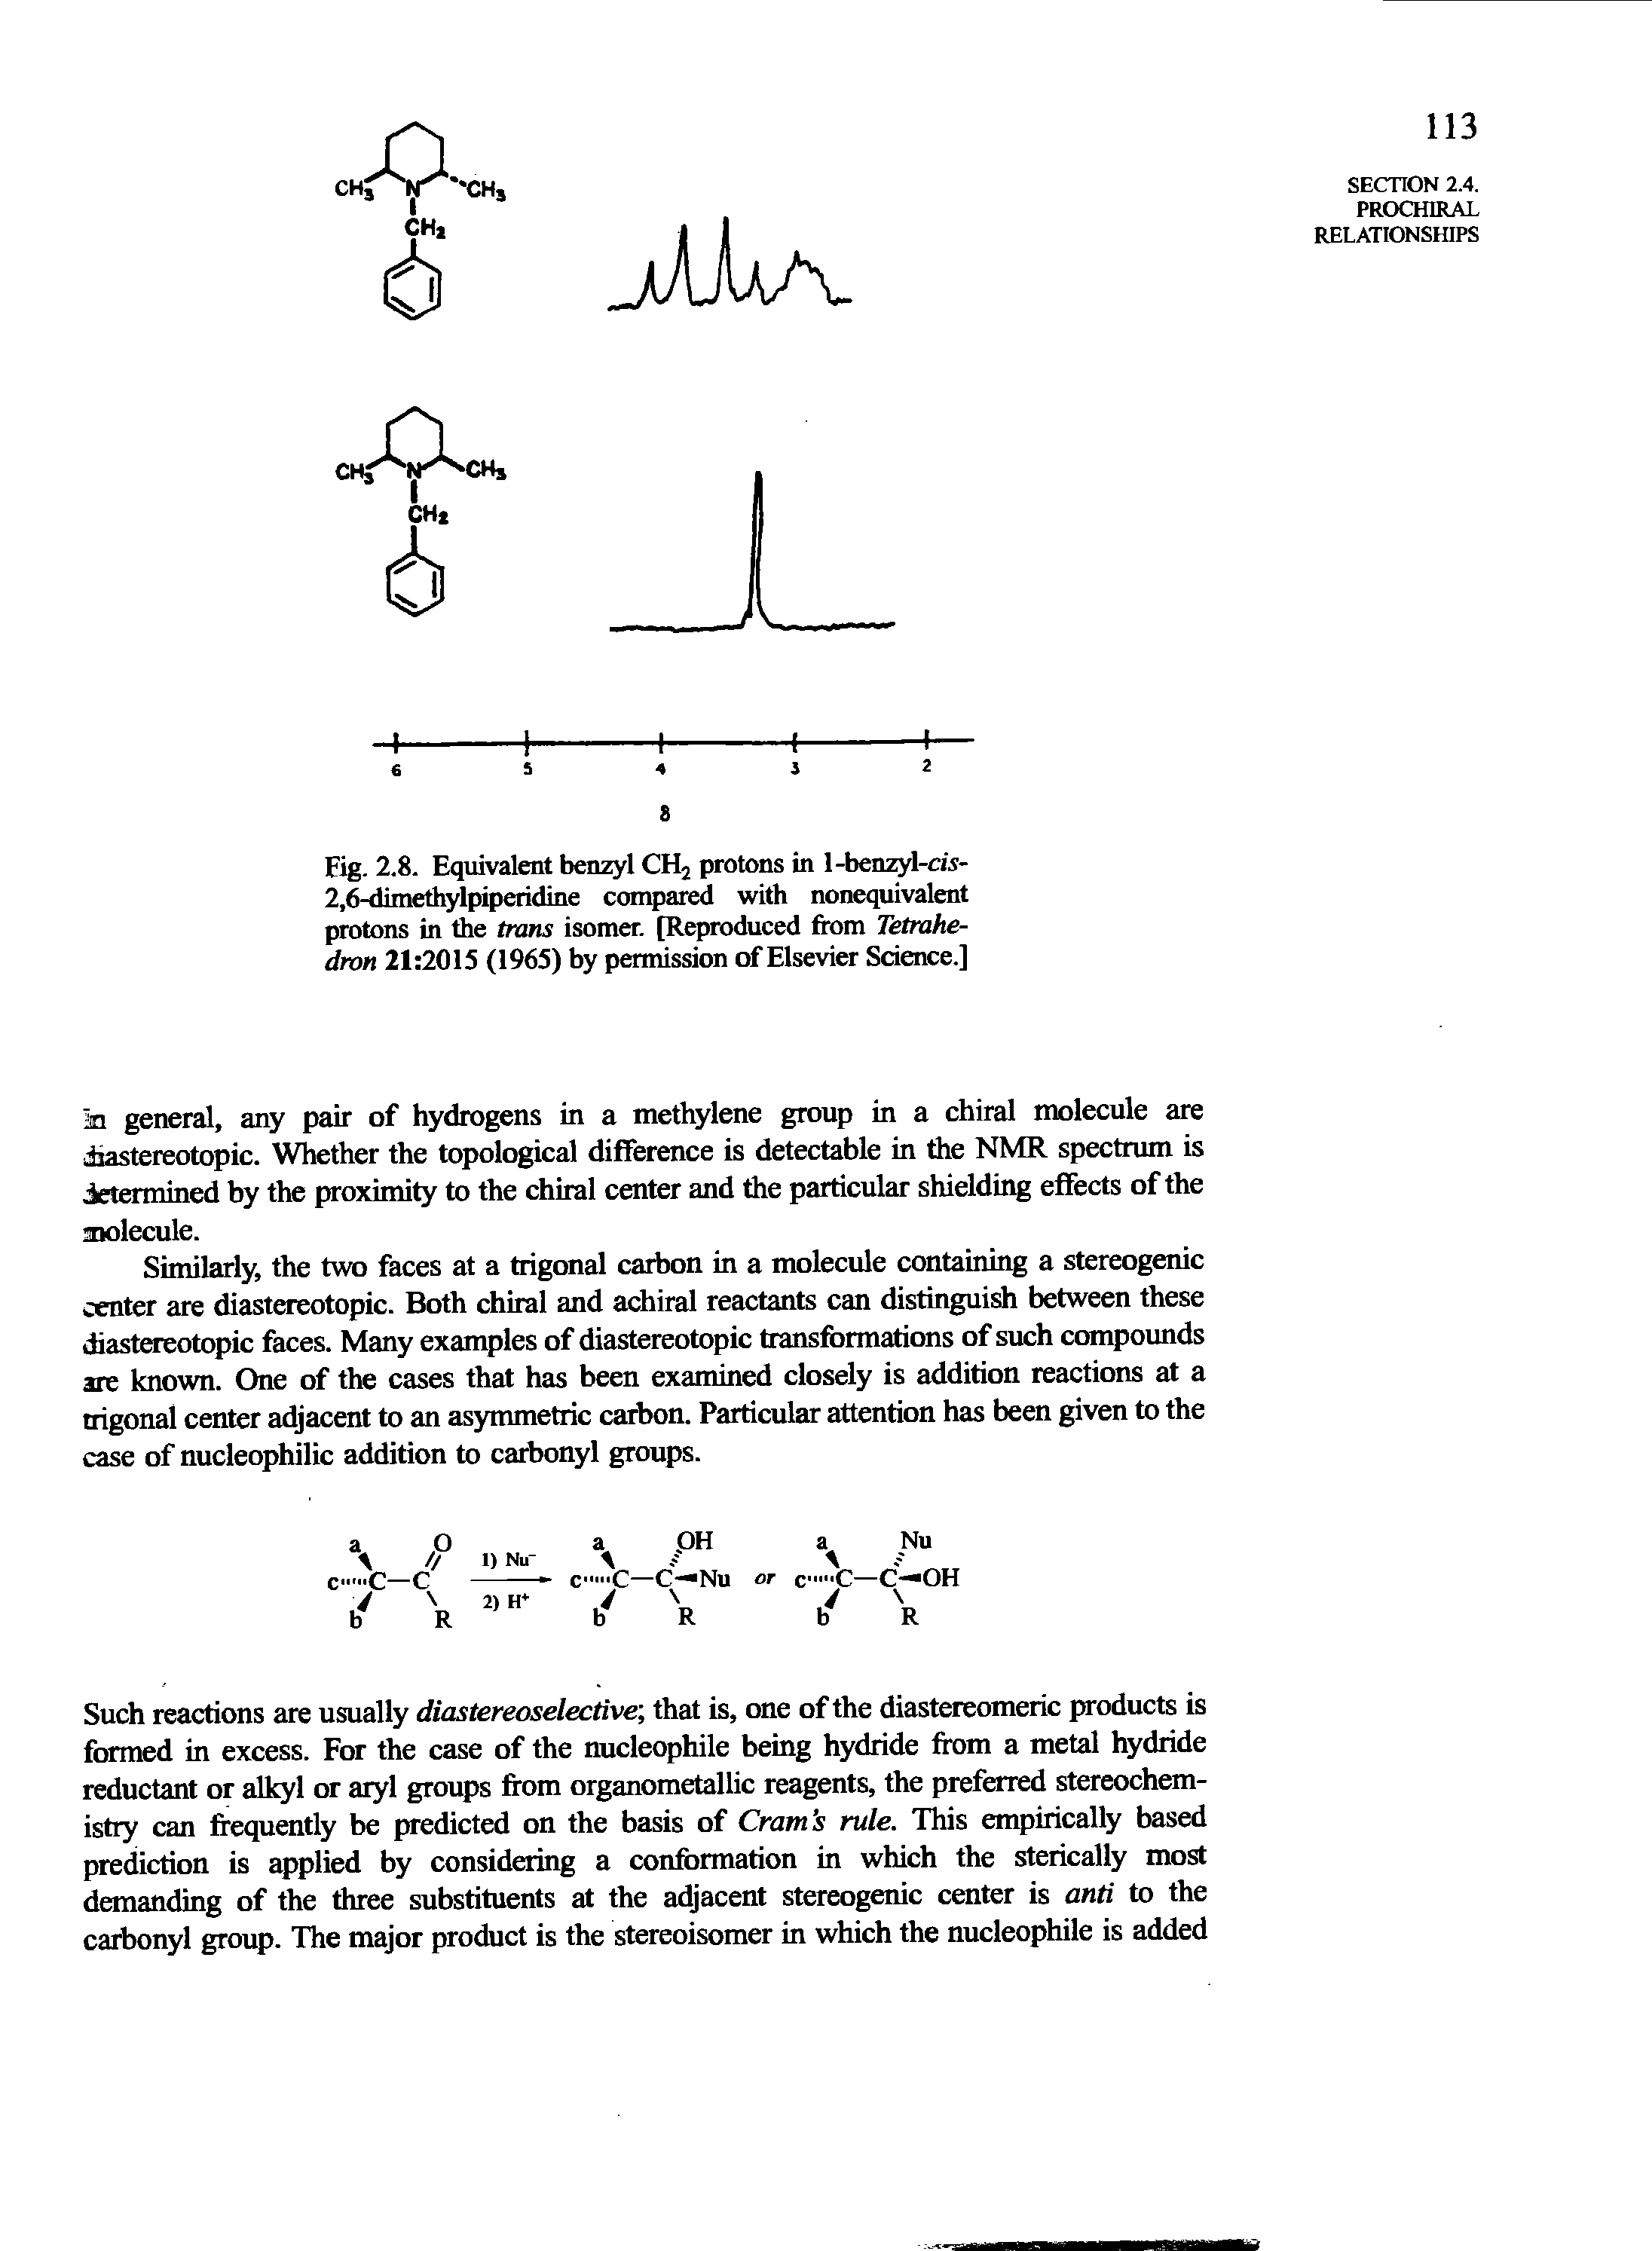 Fig. 2.8. Equivalent benzyl CHj protons in 1-benzyl-cis-2,6-dimethylpiperidine compared with nonequivalent protons in the tmns isomer. [Reproduced from Tetrahedron 21 2015 (1965) by permission of Elsevier Science.]...